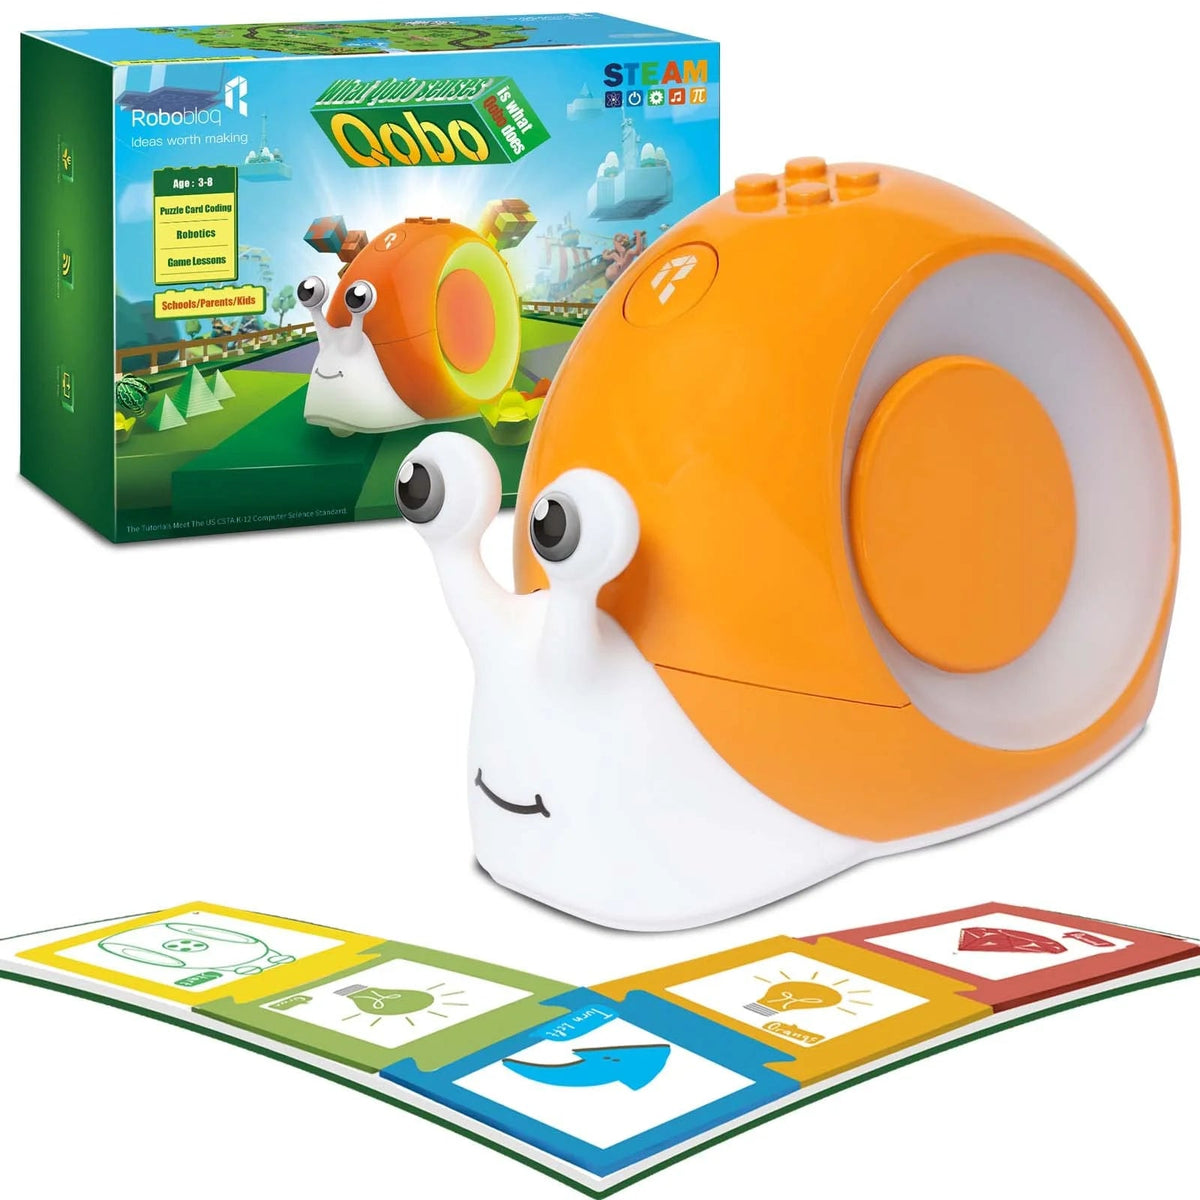 Robobloq Qobo - Toy Robot for Kids 3-6, Screen-Free Early Education Coding Robot with 2 Game Modes. Learning and Education Toy